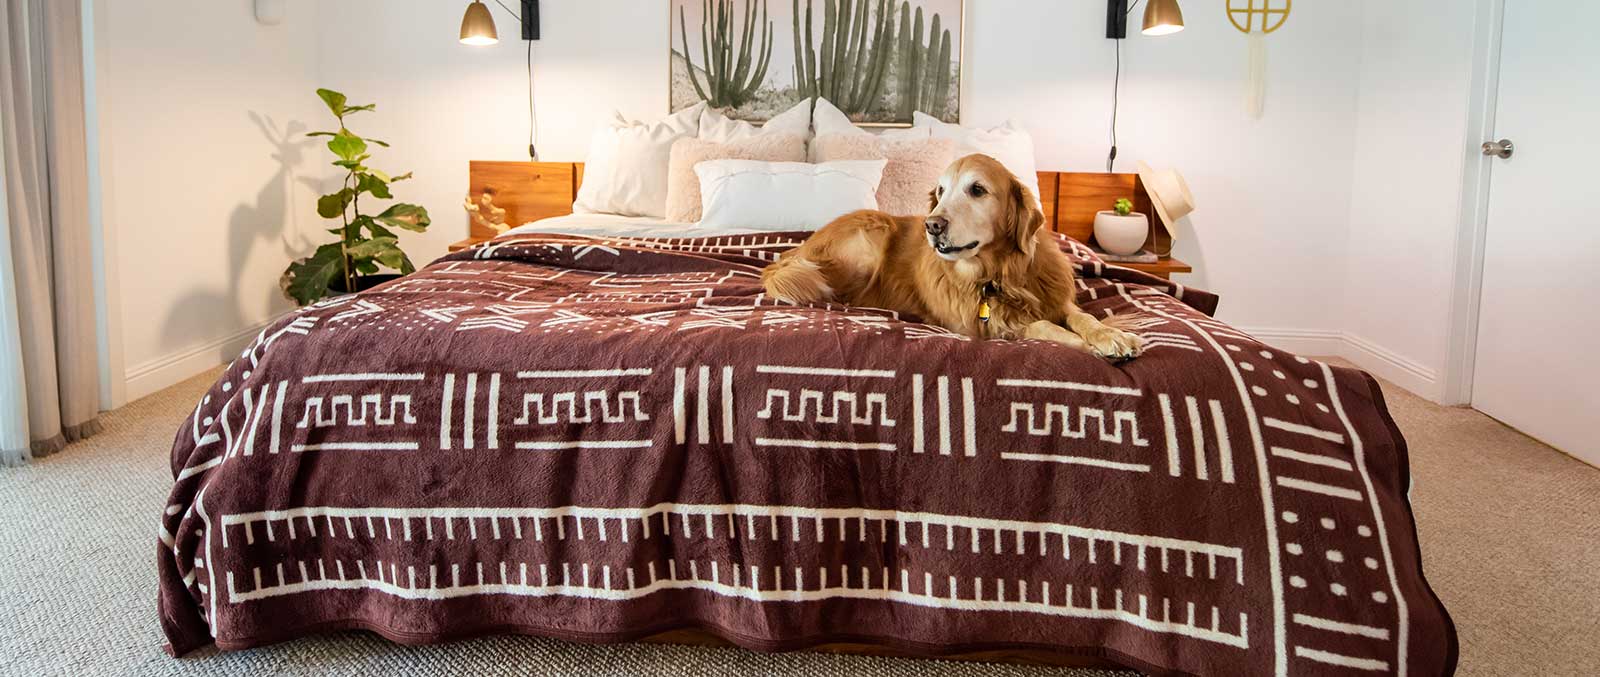 5 Types Of Blankets Every Homeowner Should Know about mali mudcloth on bed